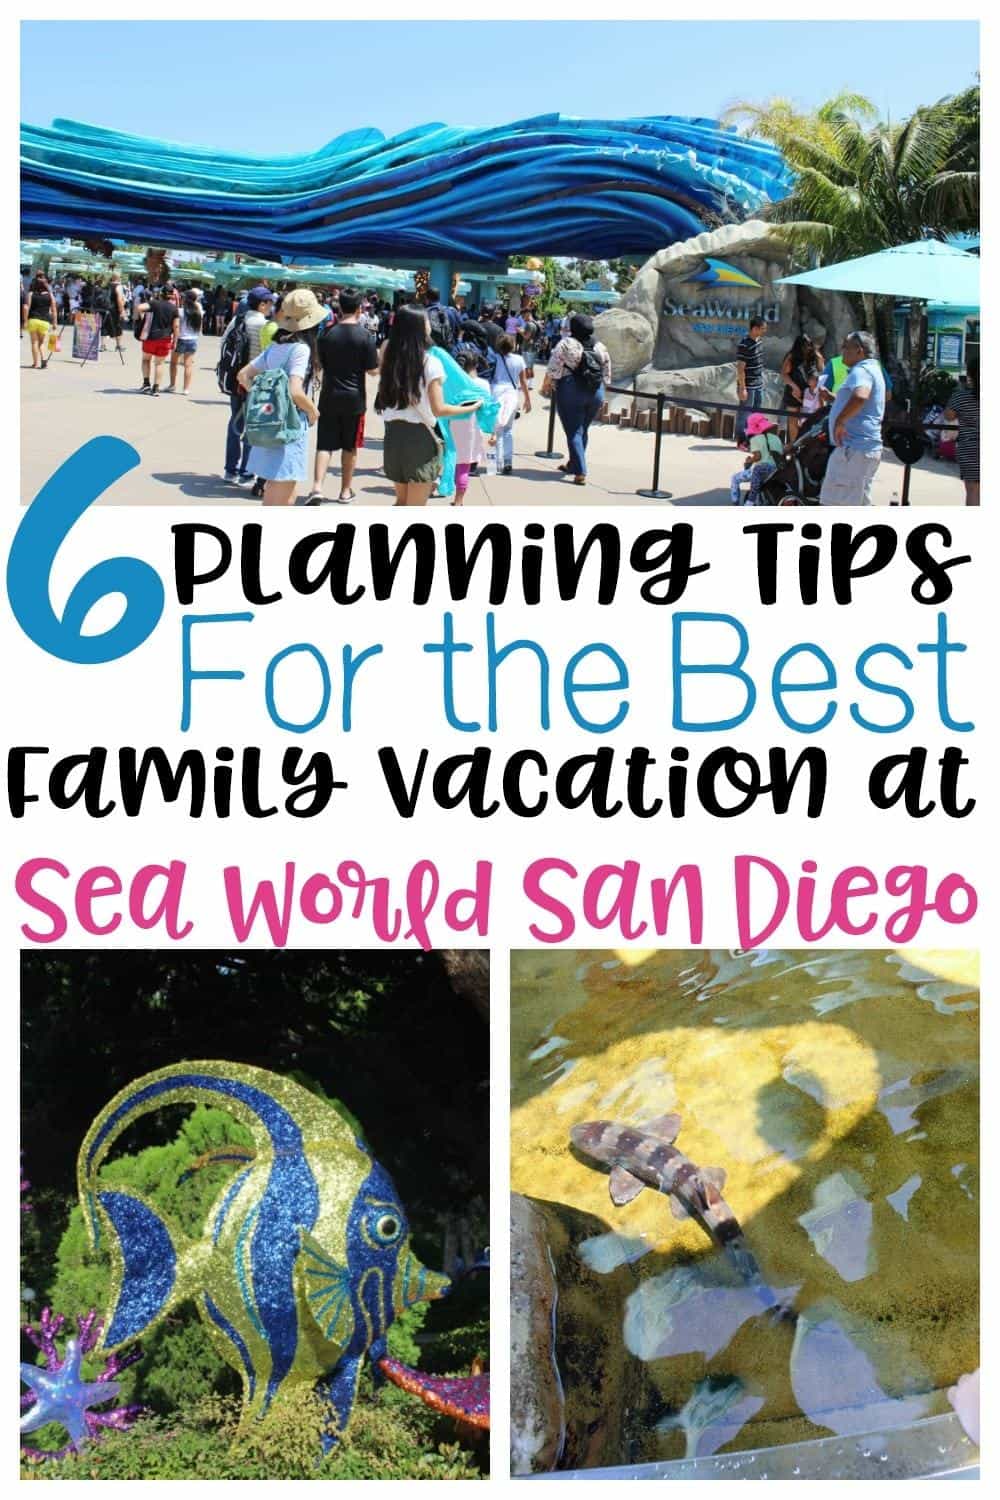 6-planning-tips-for-the-best-family-vacation-at-sea-world-san-diego